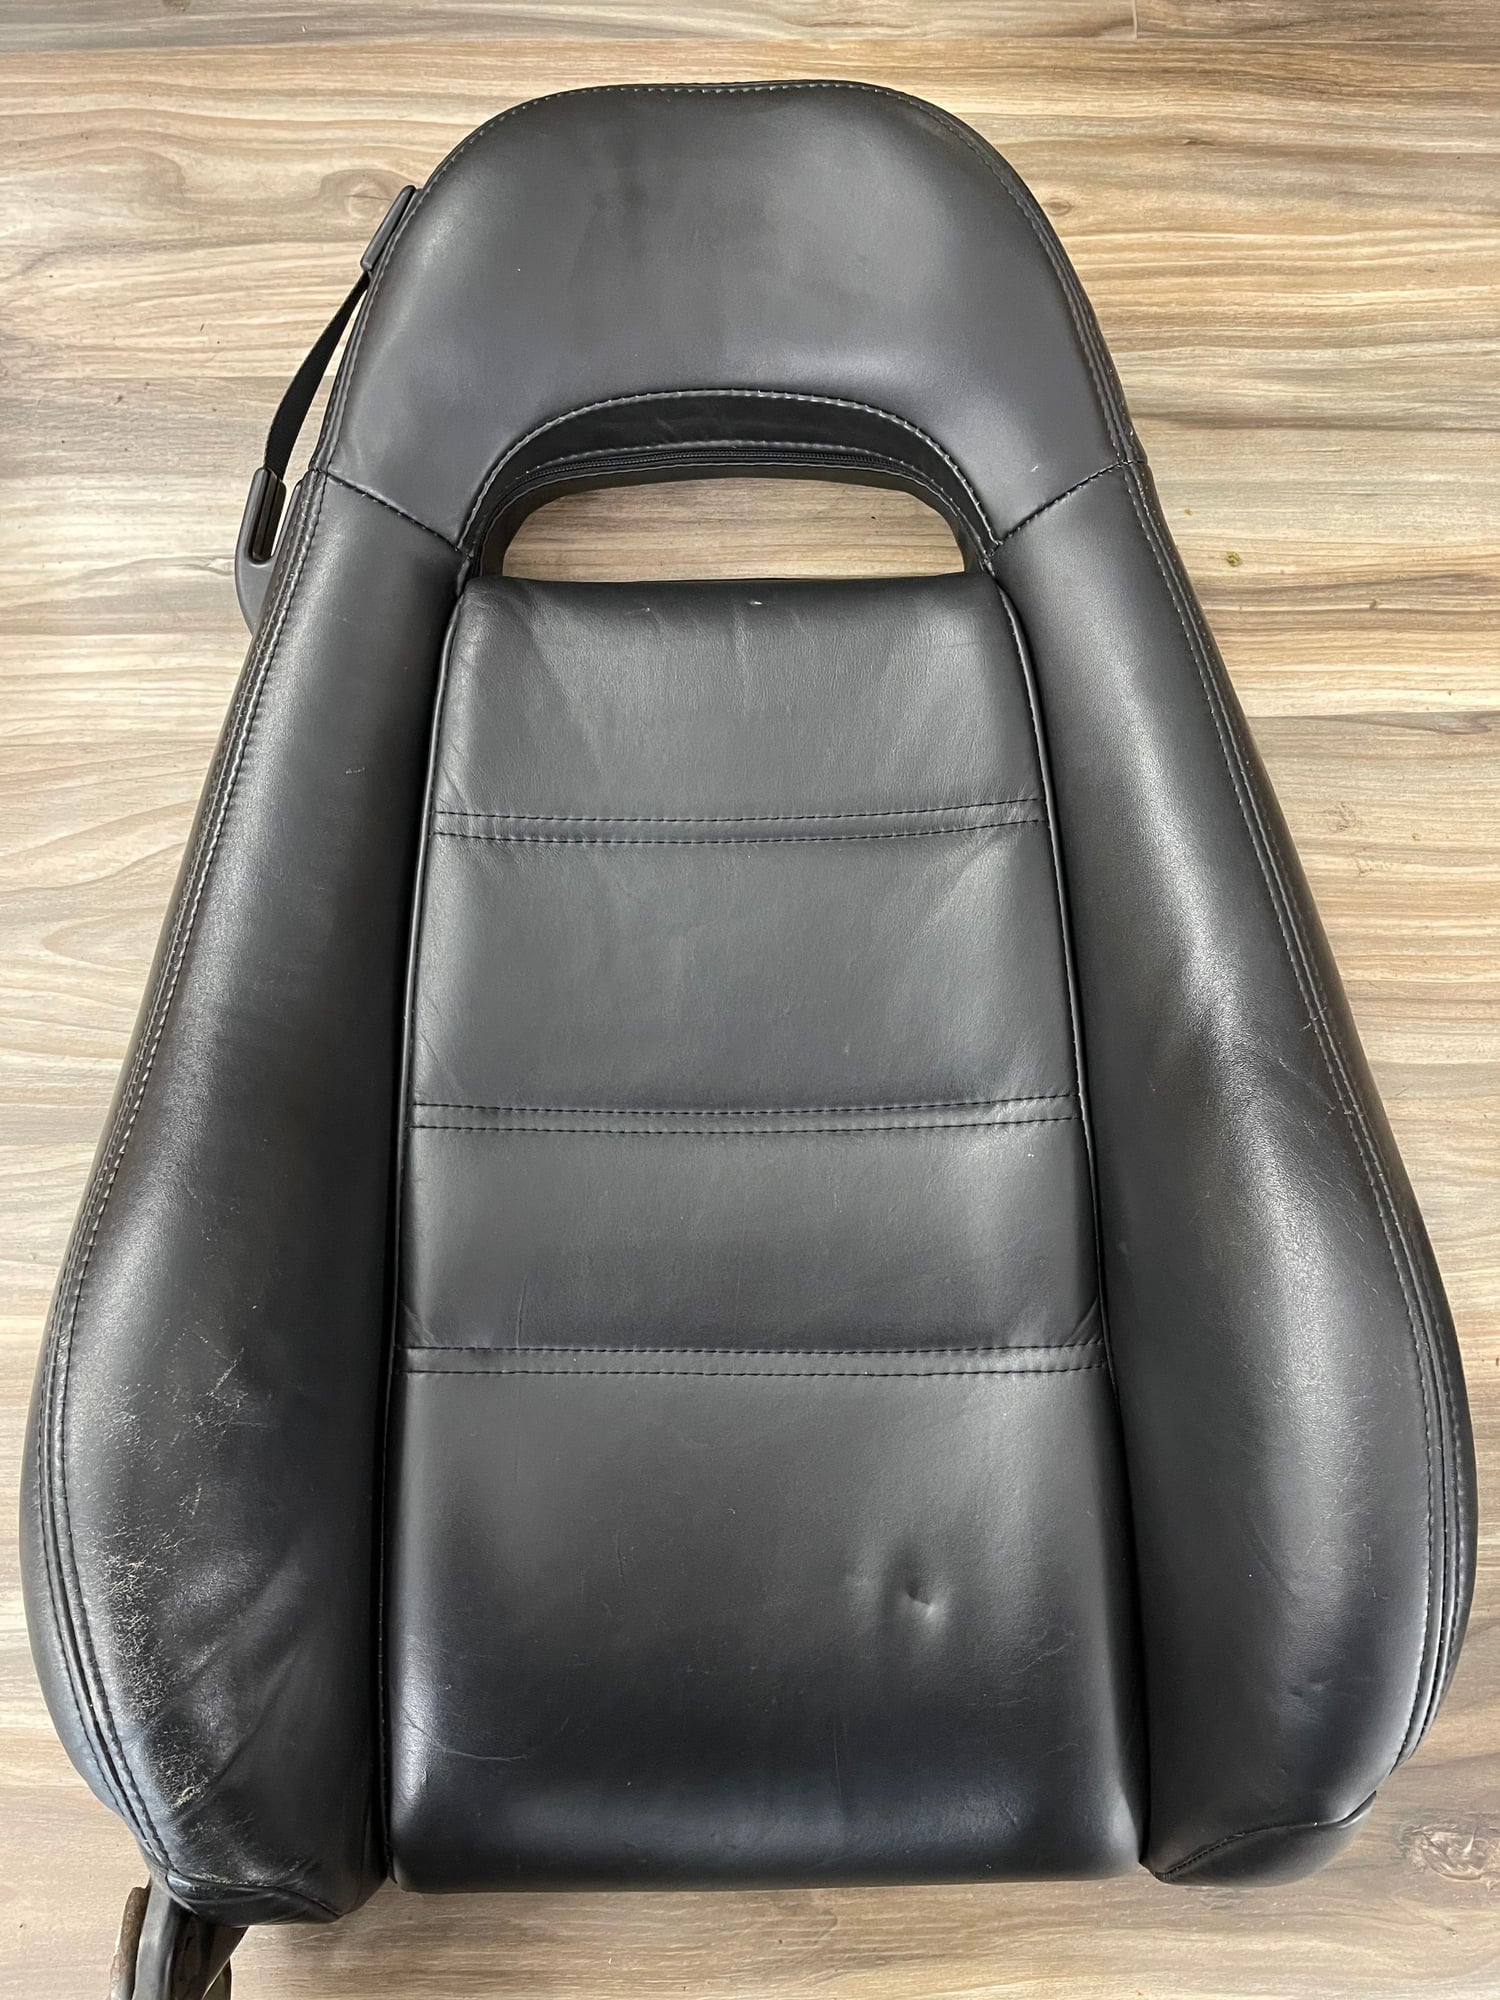 Interior/Upholstery - Black Touring Seats / Very nice condition OEM - Used - 1993 to 2002 Mazda RX-7 - Allen, TX 75013, United States